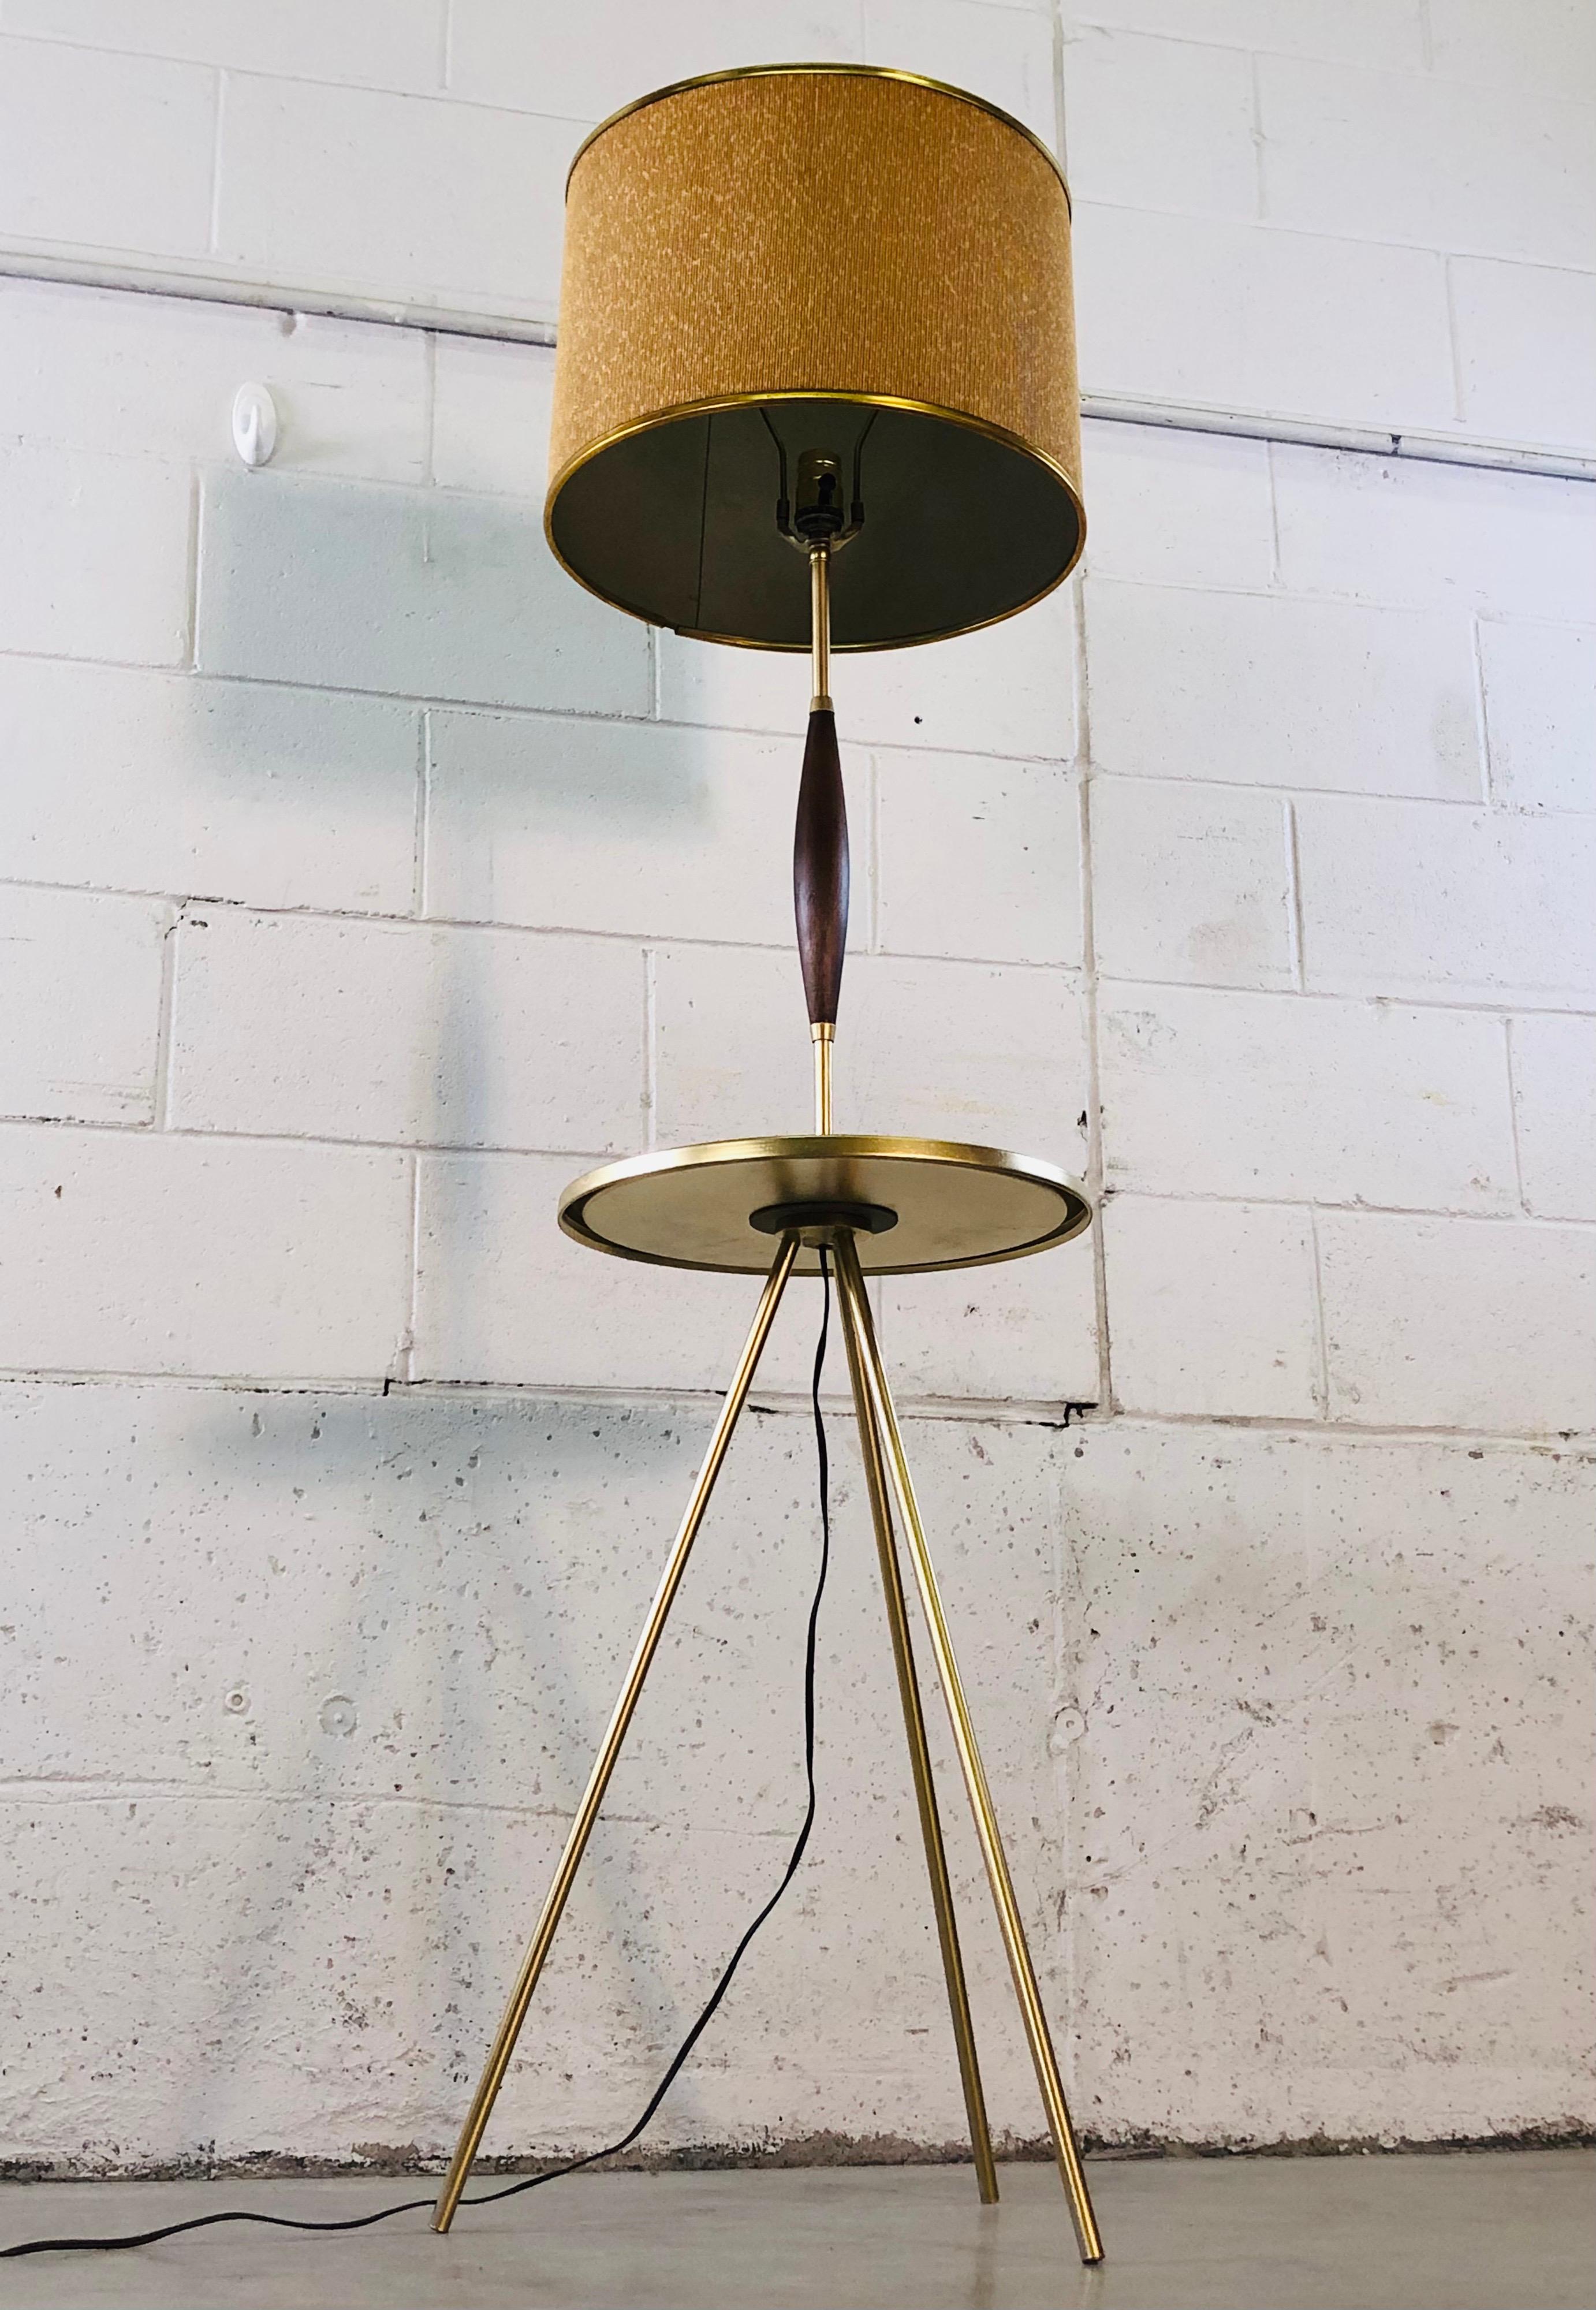 American Vintage 1950s Atomic Style Tripod Floor Lamp For Sale